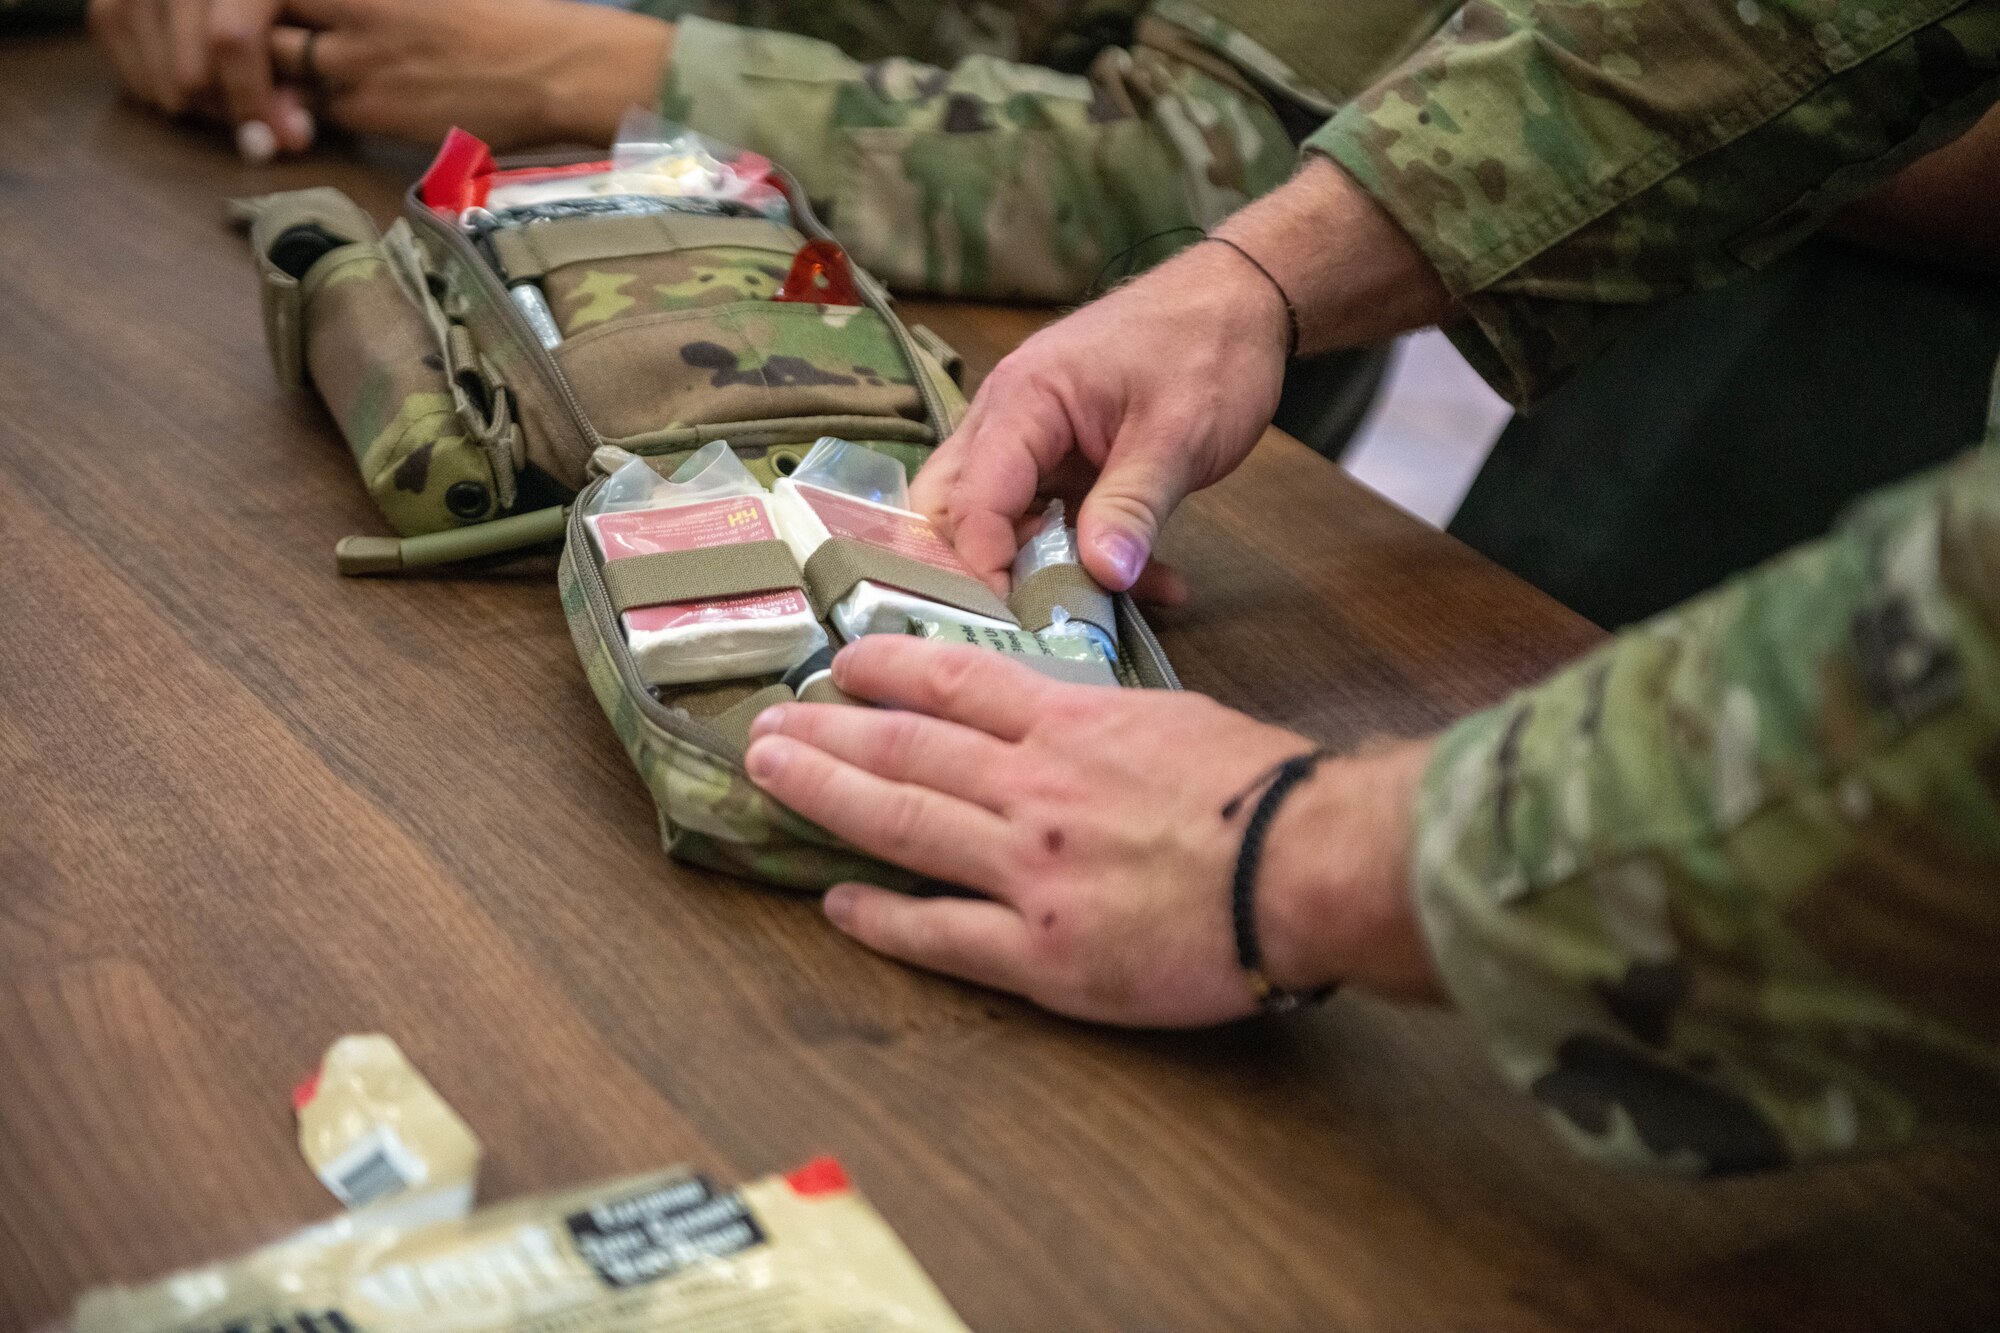 U.S. Air Force Capt. Daniel Porter, a clinical nurse with the 379th Expeditionary Operational Medical Readiness Squadron, explains parts of an Individual First Aid Kit during a training exercise at Al Udeid Air Base, Qatar, Sept. 23, 2022. The IFAK contains a tourniquet, shears, and other medical equipment to rapidly treat injuries. (U.S. Air National Guard photo by Airman 1st Class Constantine Bambakidis)